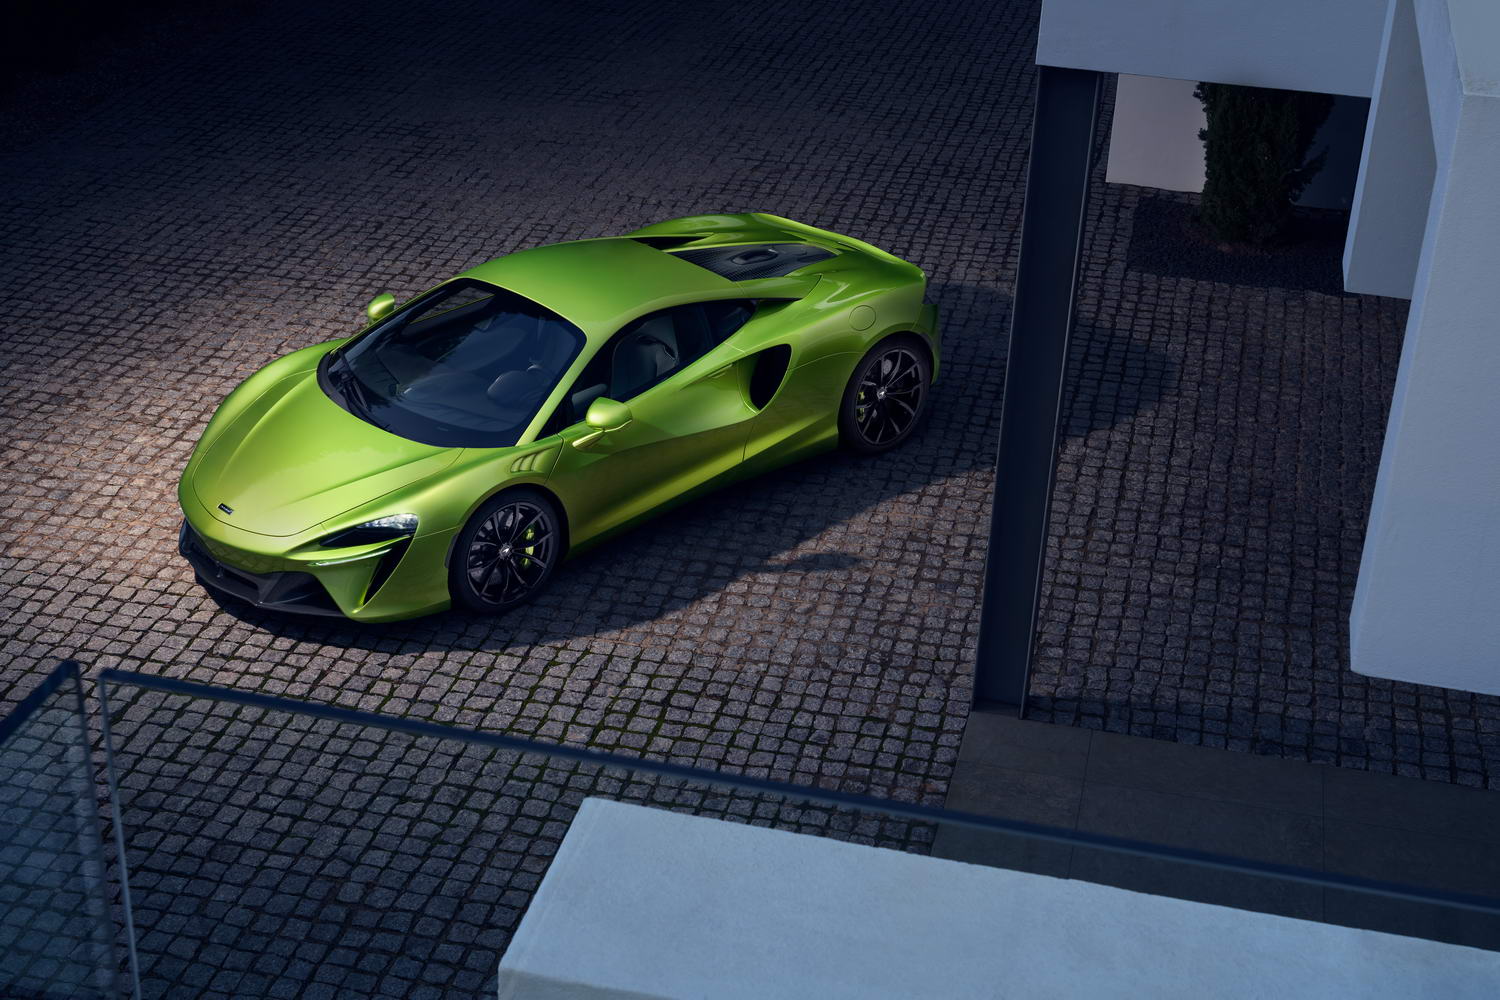 Car News | McLaren shifts into new age with Artura | CompleteCar.ie